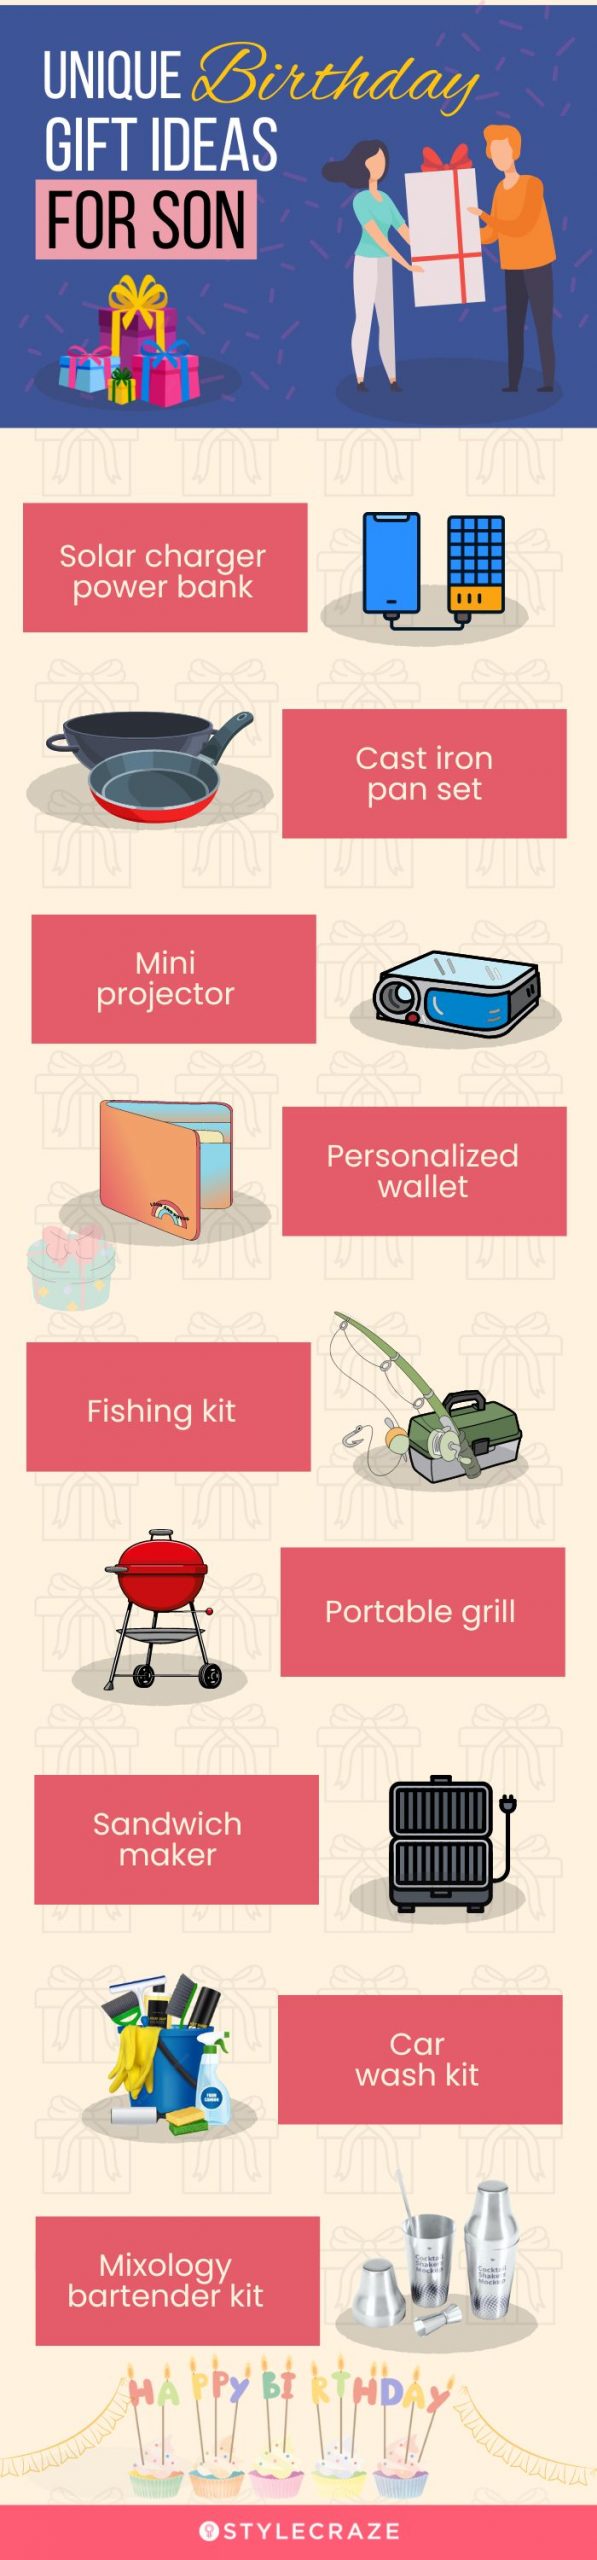 unique birthday gift ideas for son [infographic]